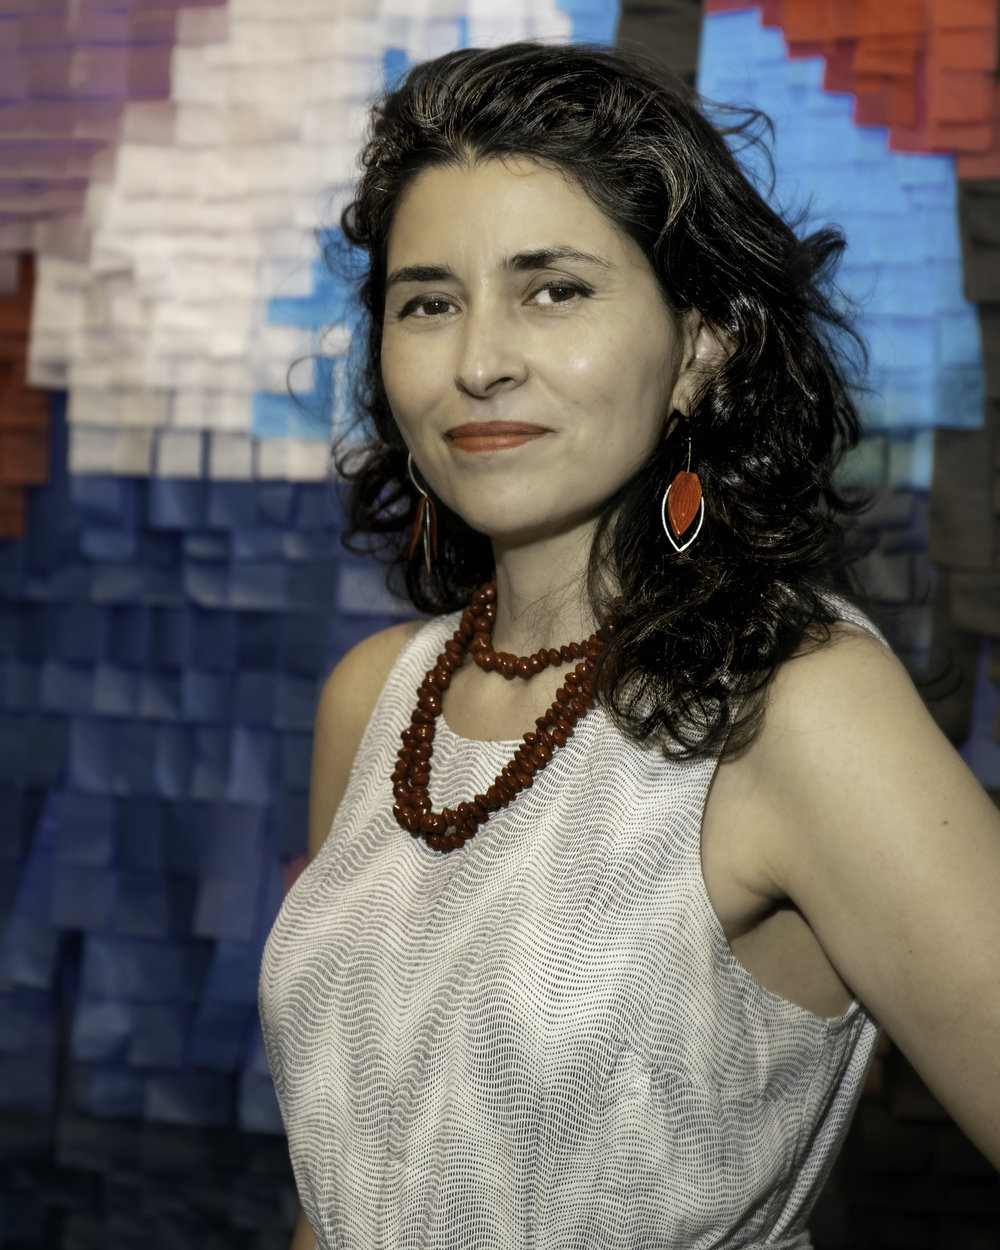 Online Exhibition Featuring The Works Of Artist Lina Puerta CUNY